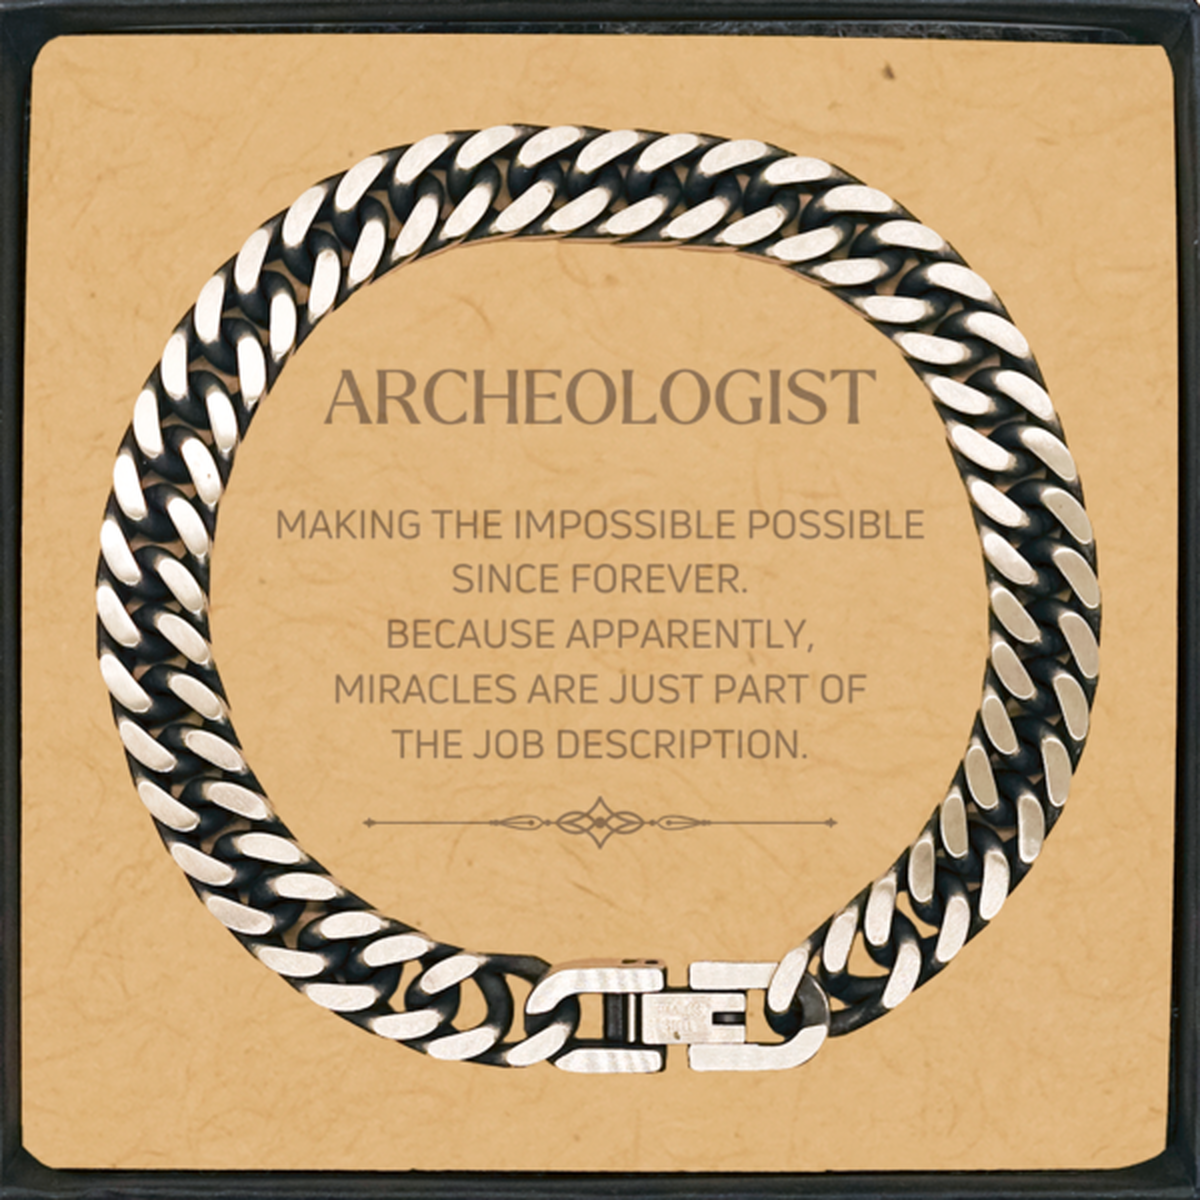 Funny Archeologist Gifts, Miracles are just part of the job description, Inspirational Birthday Cuban Link Chain Bracelet For Archeologist, Men, Women, Coworkers, Friends, Boss